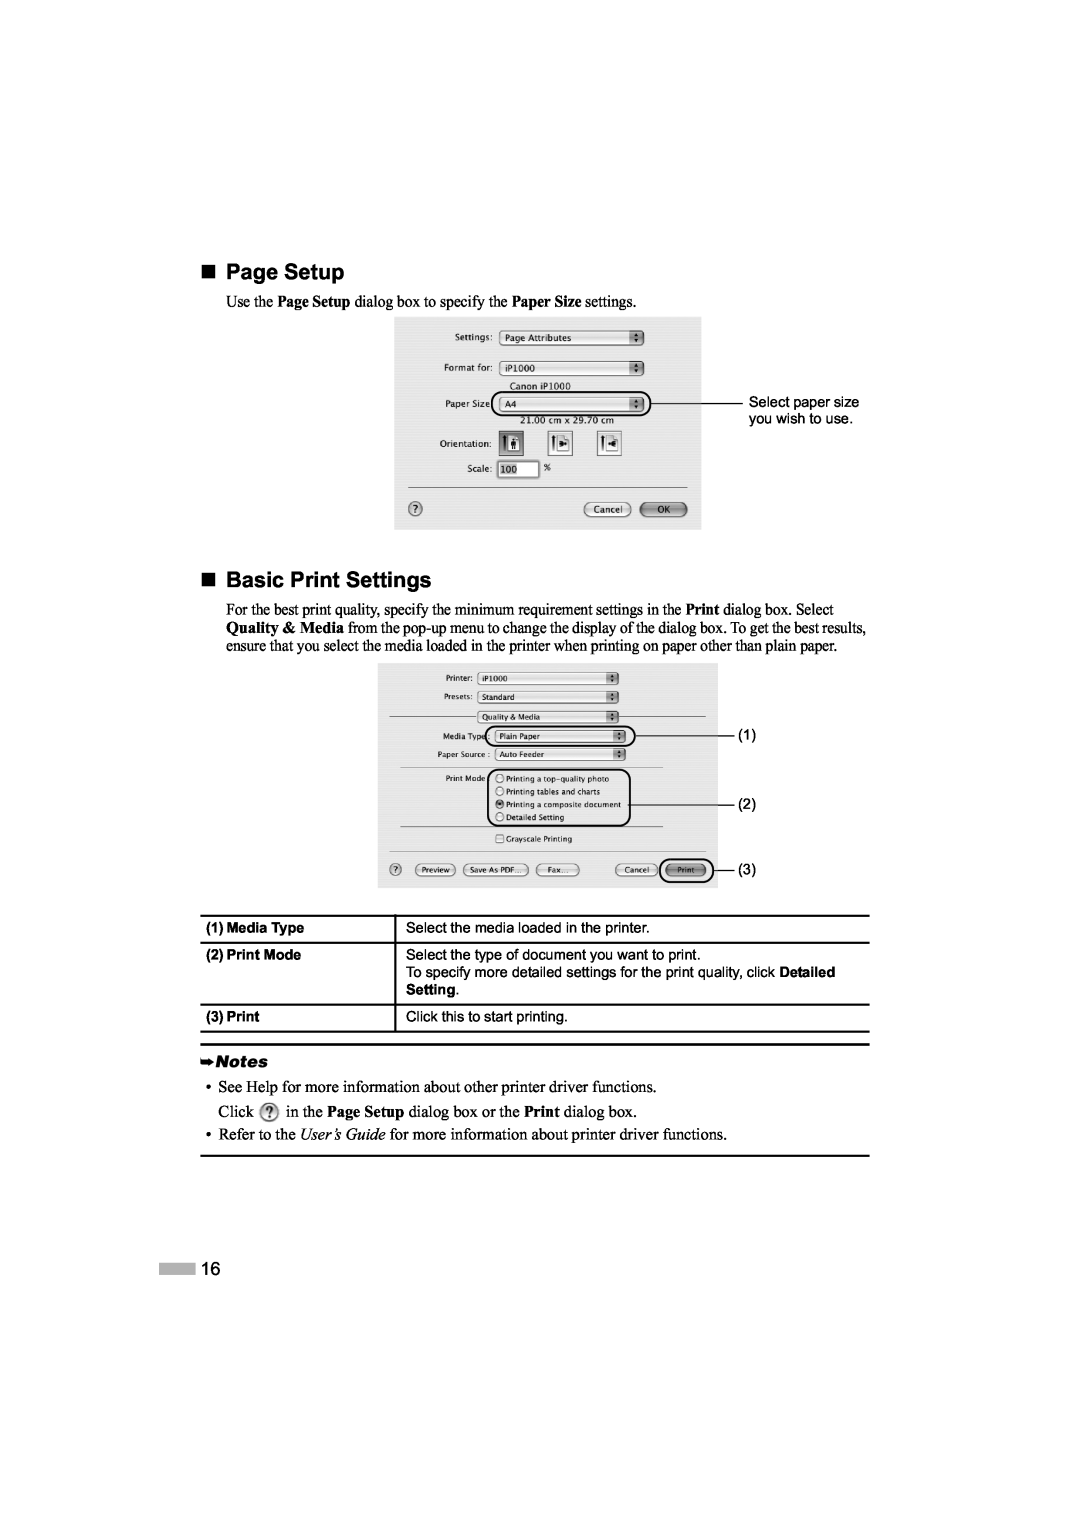 Canon IP1000 „ Page Setup, „ Basic Print Settings, Use the Page Setup dialog box to specify the Paper Size settings 